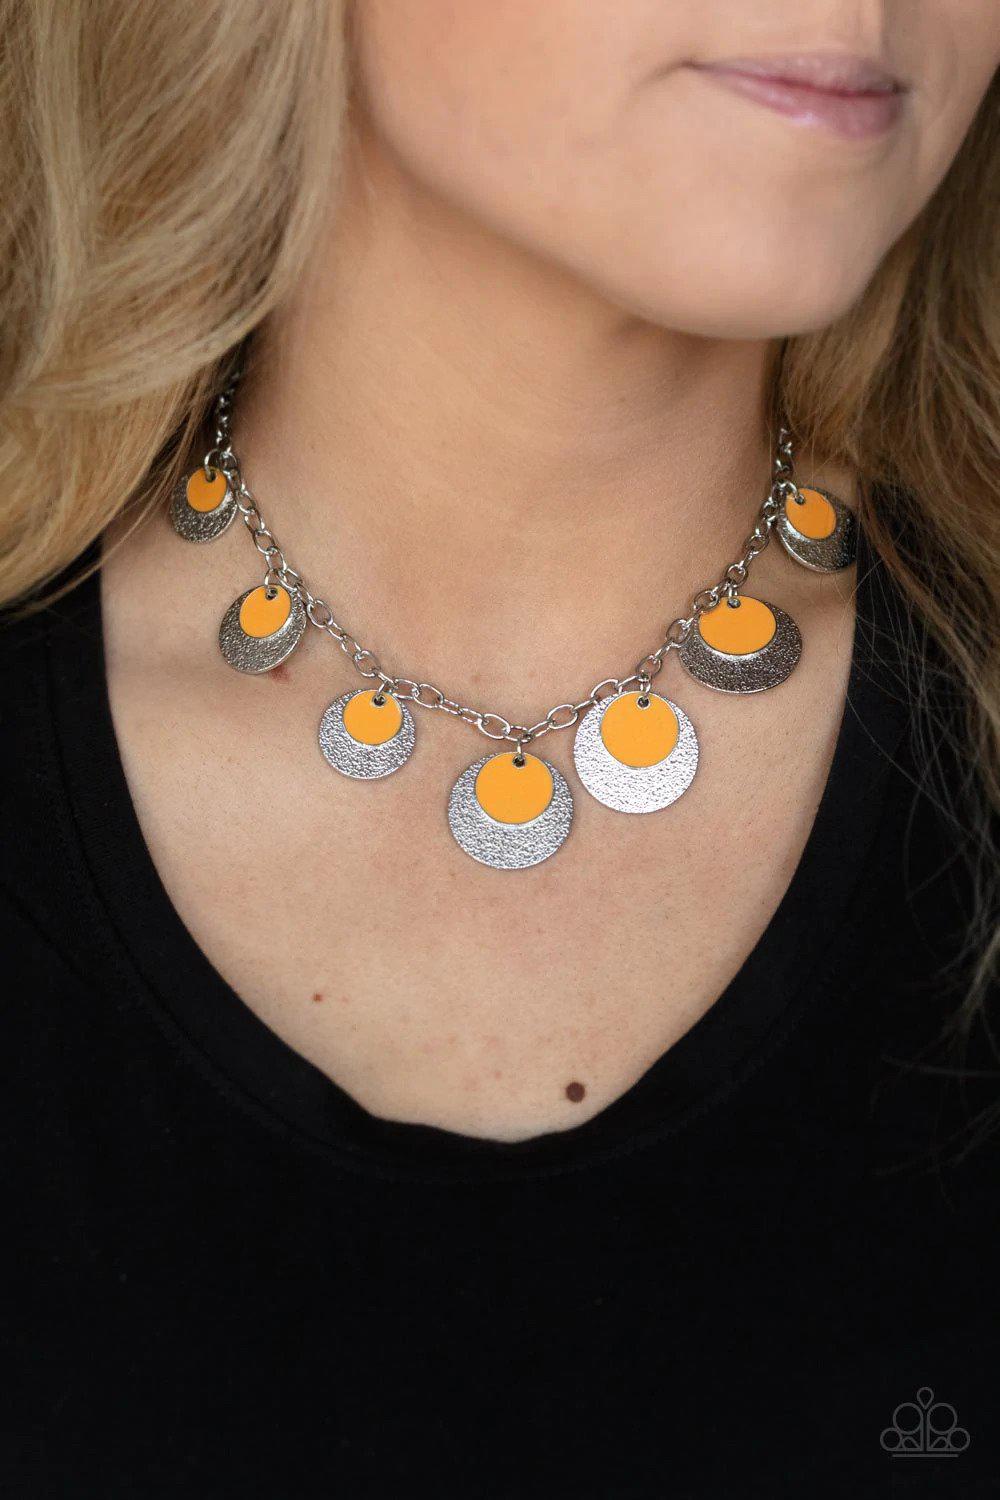 The Cosmos Are Calling Orange Necklace - Paparazzi Accessories- lightbox - CarasShop.com - $5 Jewelry by Cara Jewels